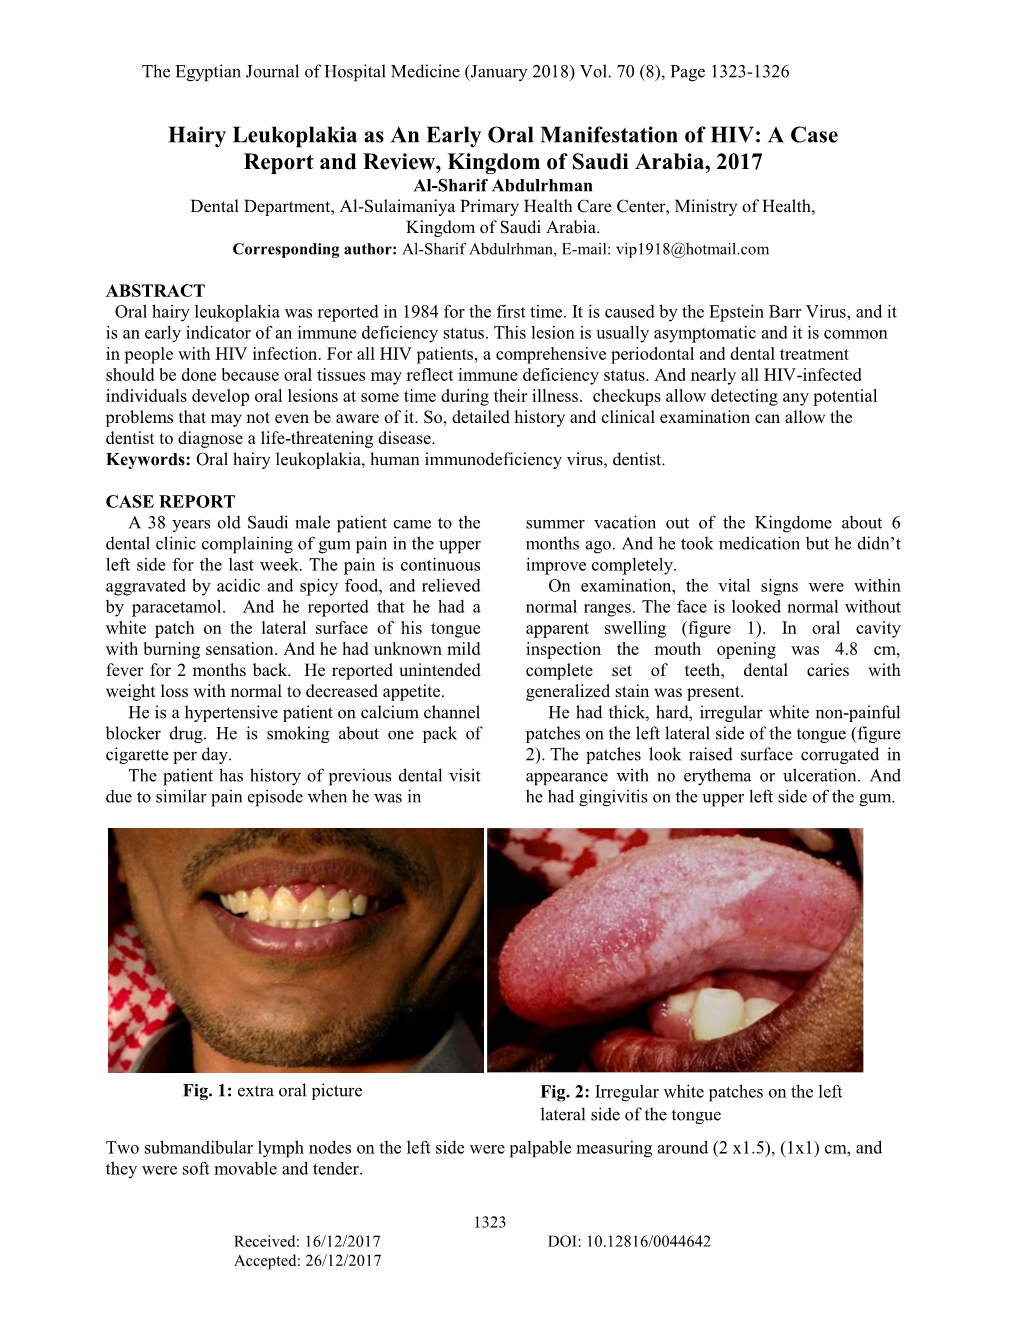 Hairy Leukoplakia As an Early Oral Manifestation of HIV: a Case Report